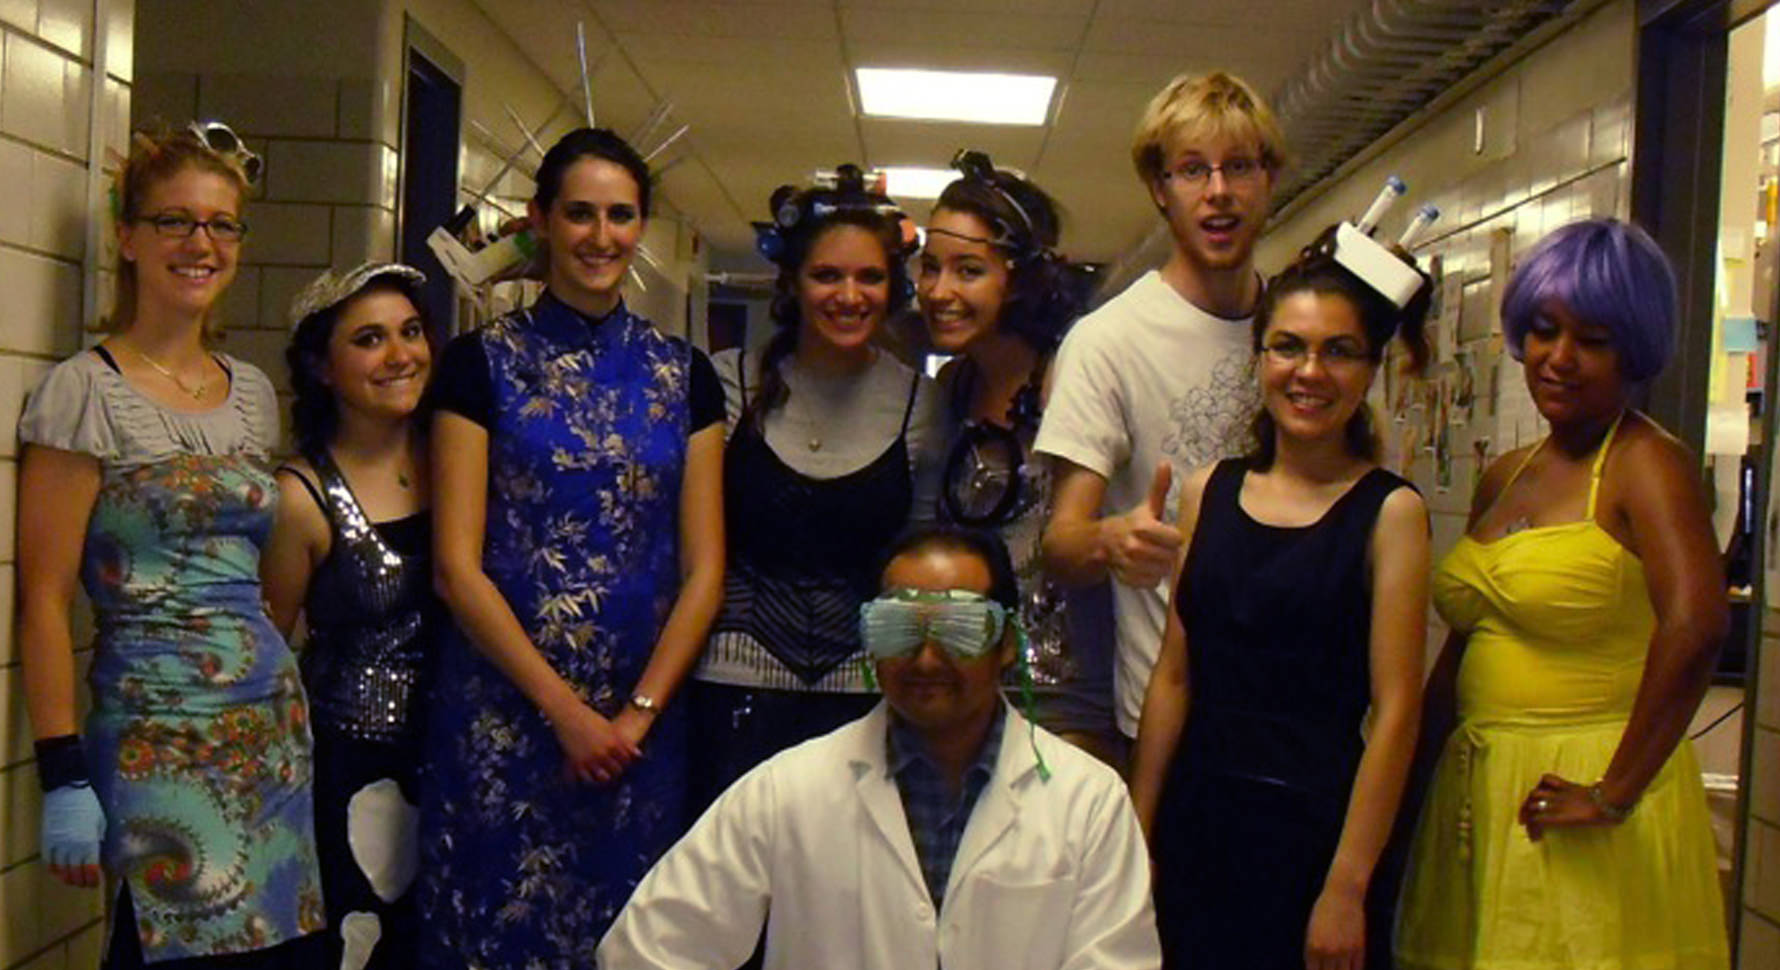 Ross and students pose after filming a fun lab video, a spoof of the song “Telephone” by Lady Gaga and Beyonce. Their version is titled “Microscope.” 